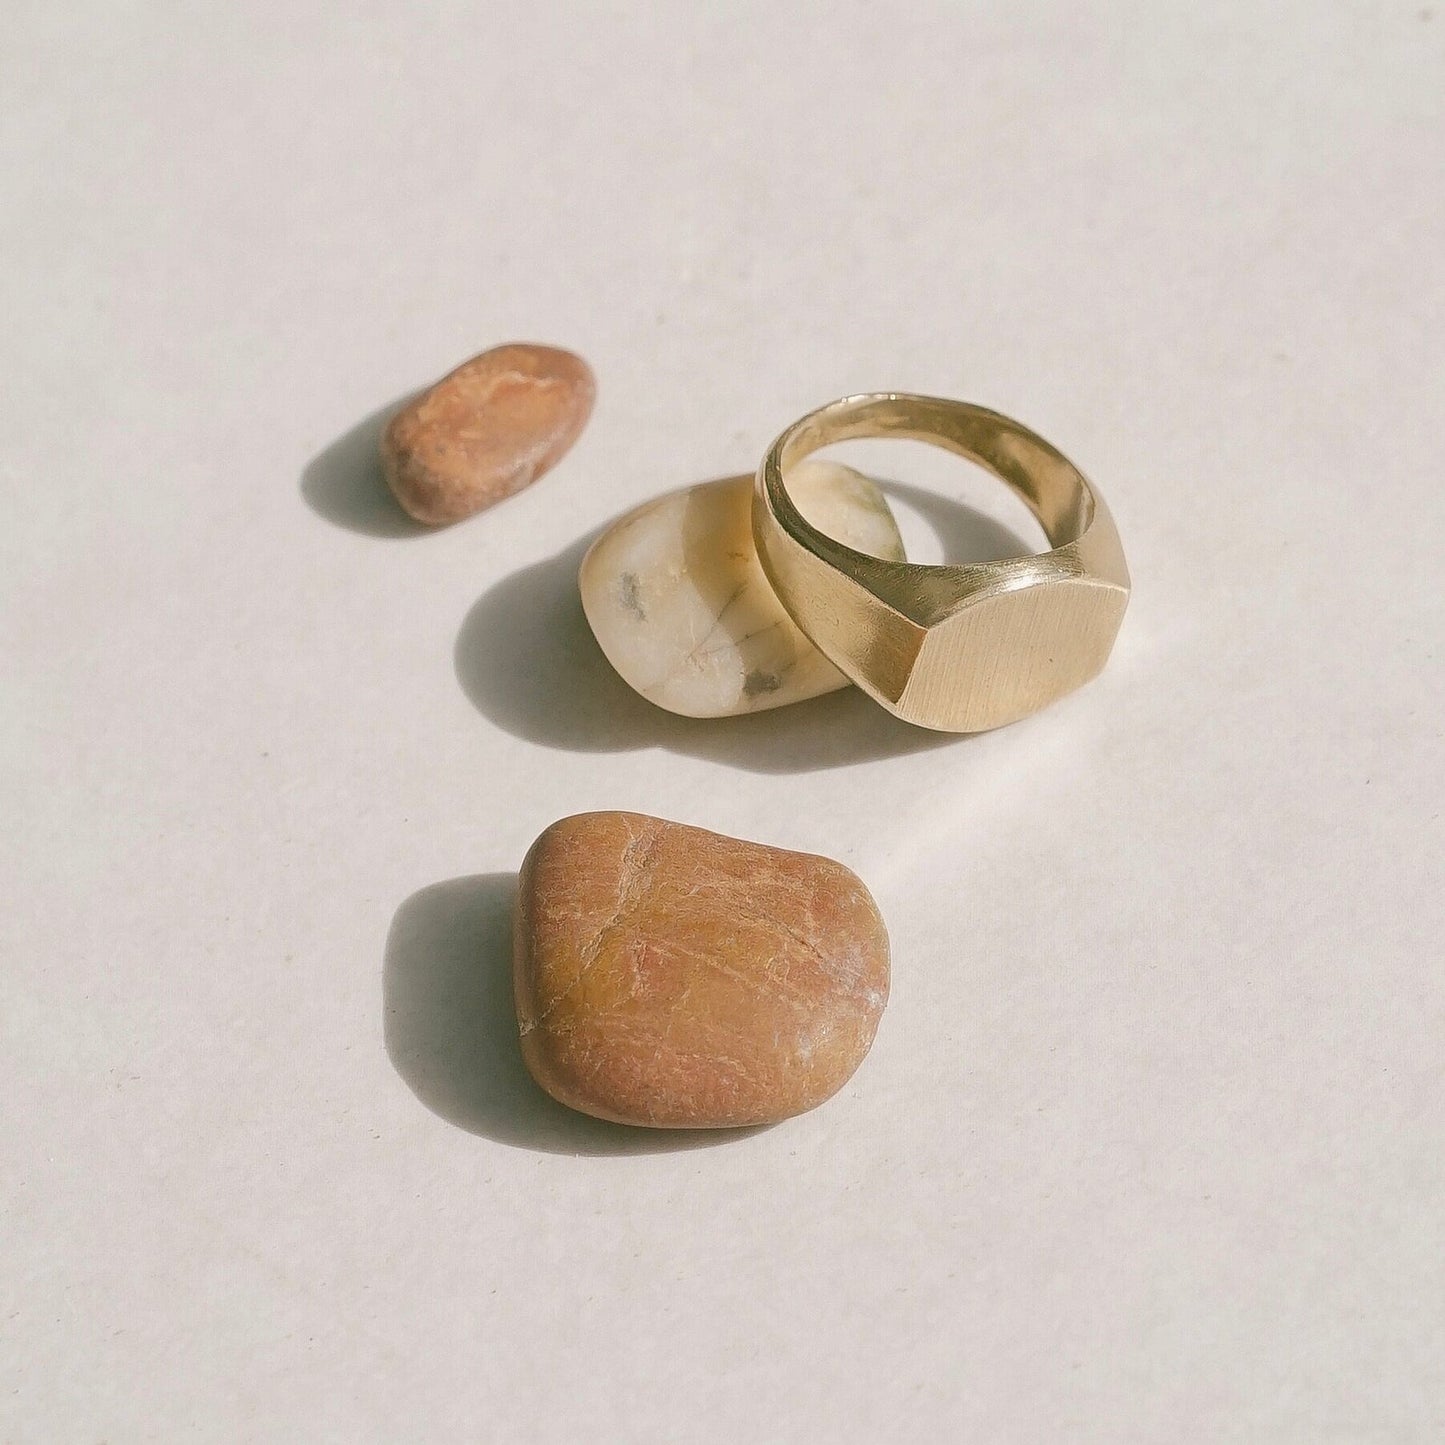 Unisex vintage inspired flat top Signet ring. Handmade with recycled materials in the Santa Cruz mountains.